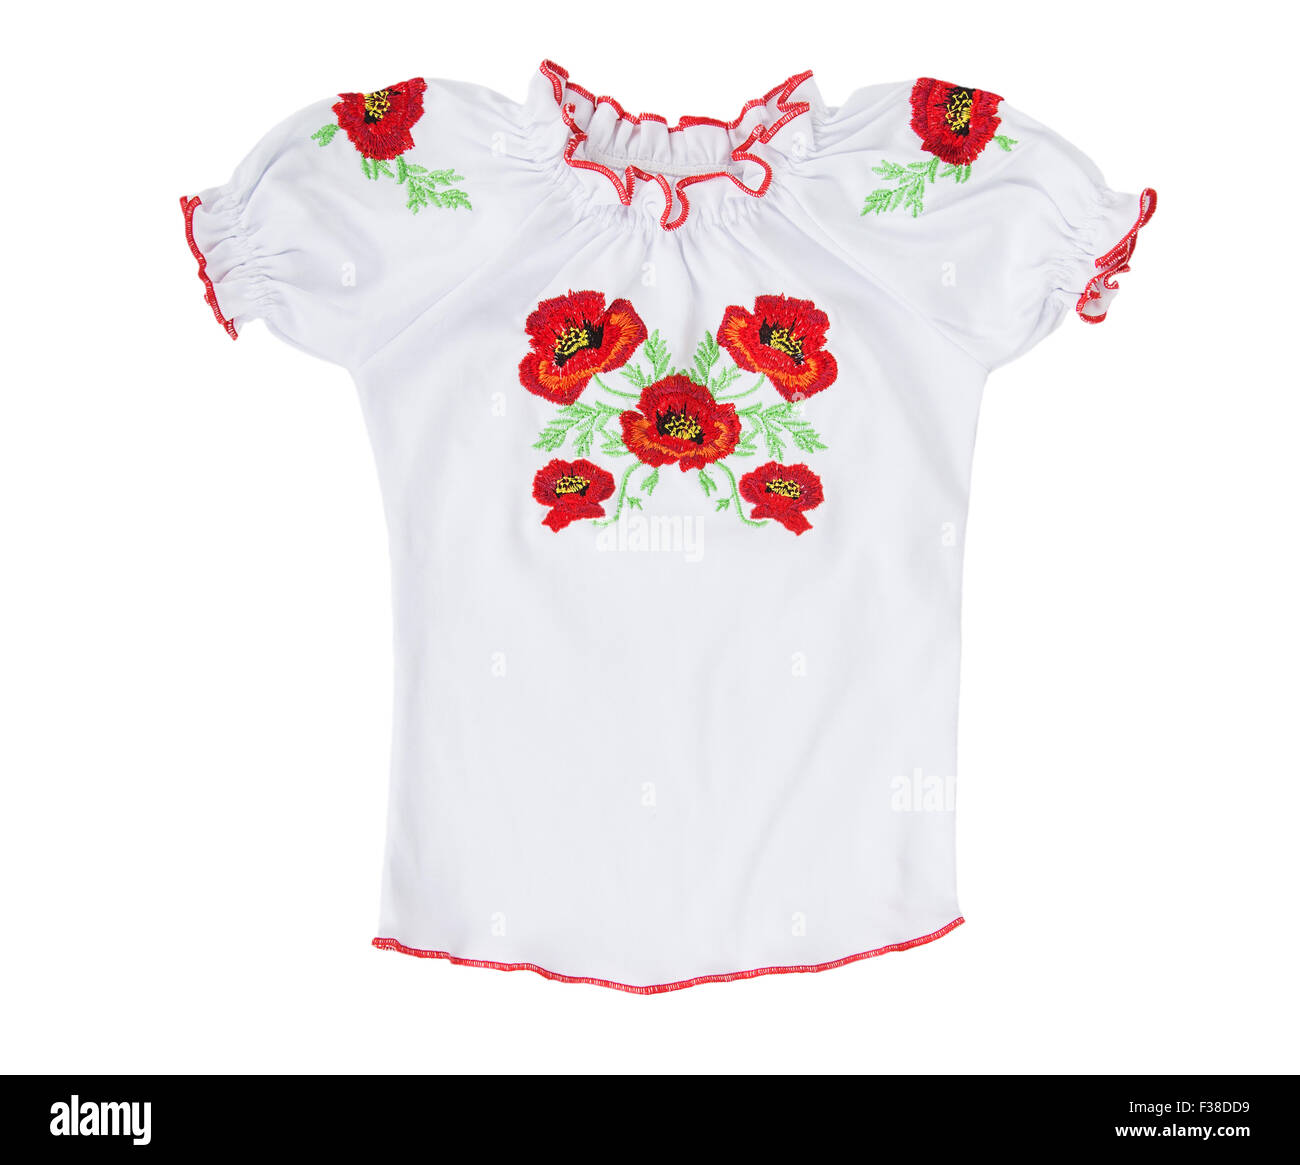 Children's white T-shirt with embroidered poppies isolated on white background Stock Photo